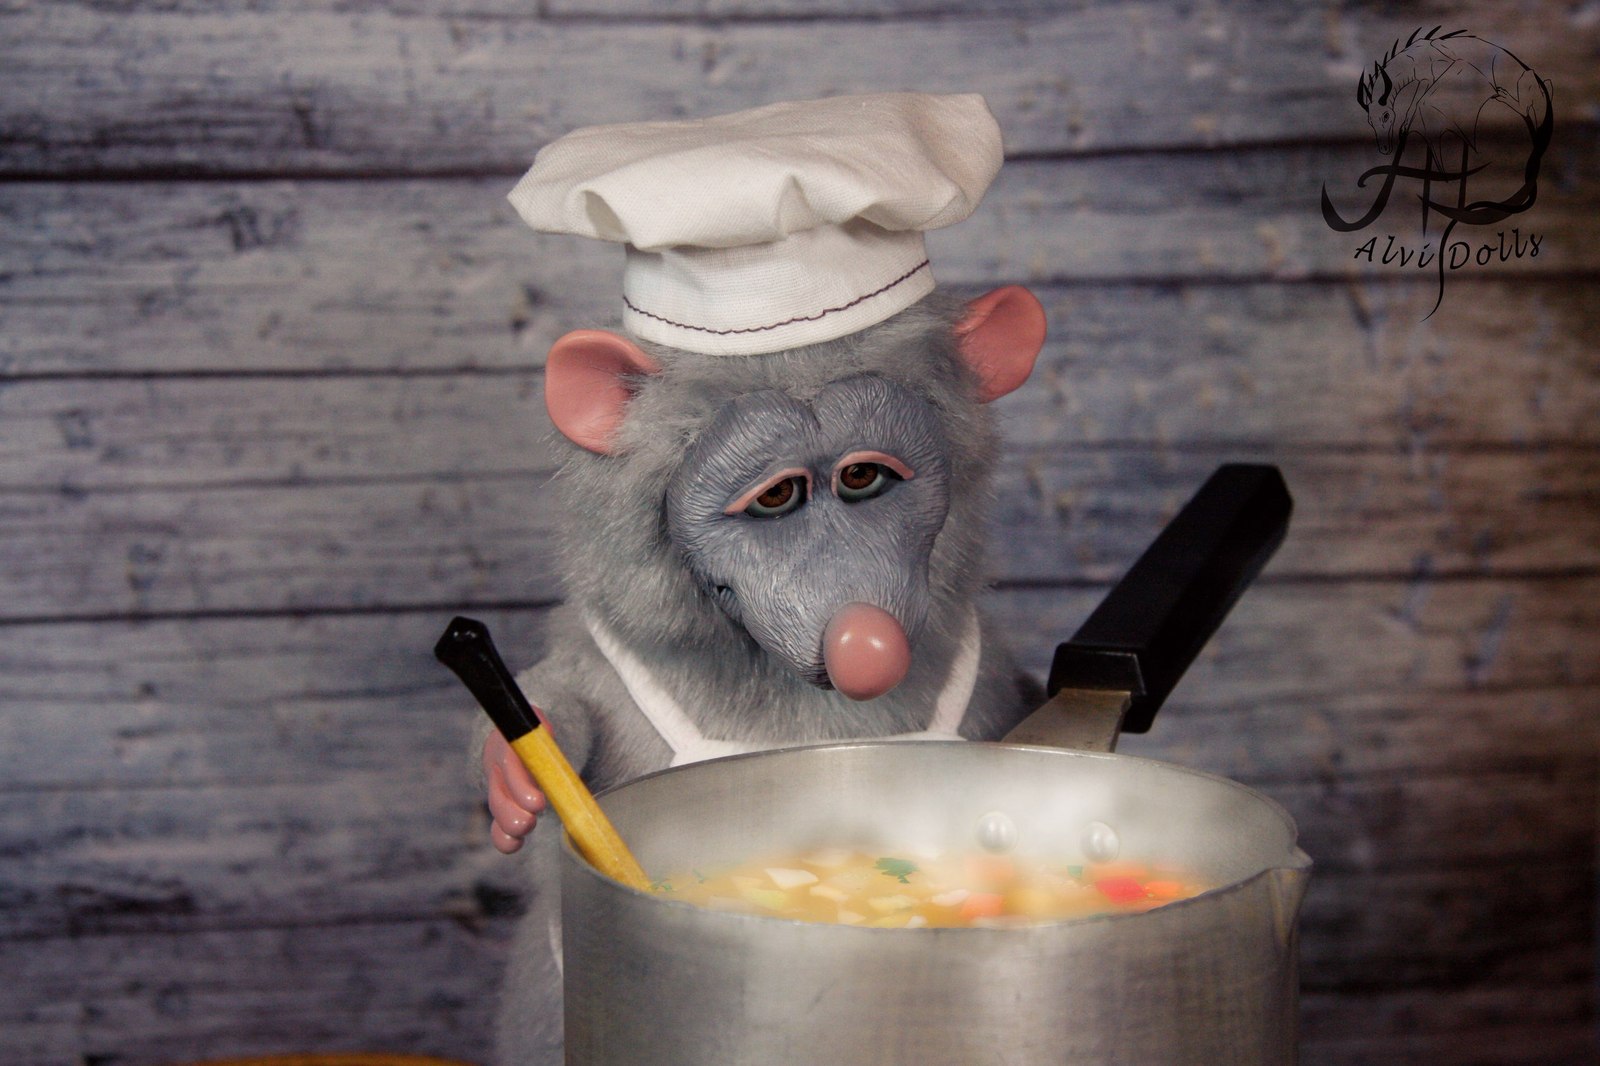 Rat Chef (based on the cartoon) - My, Polymer clay, Author's toy, Mixed media, With your own hands, Needlework, Longpost